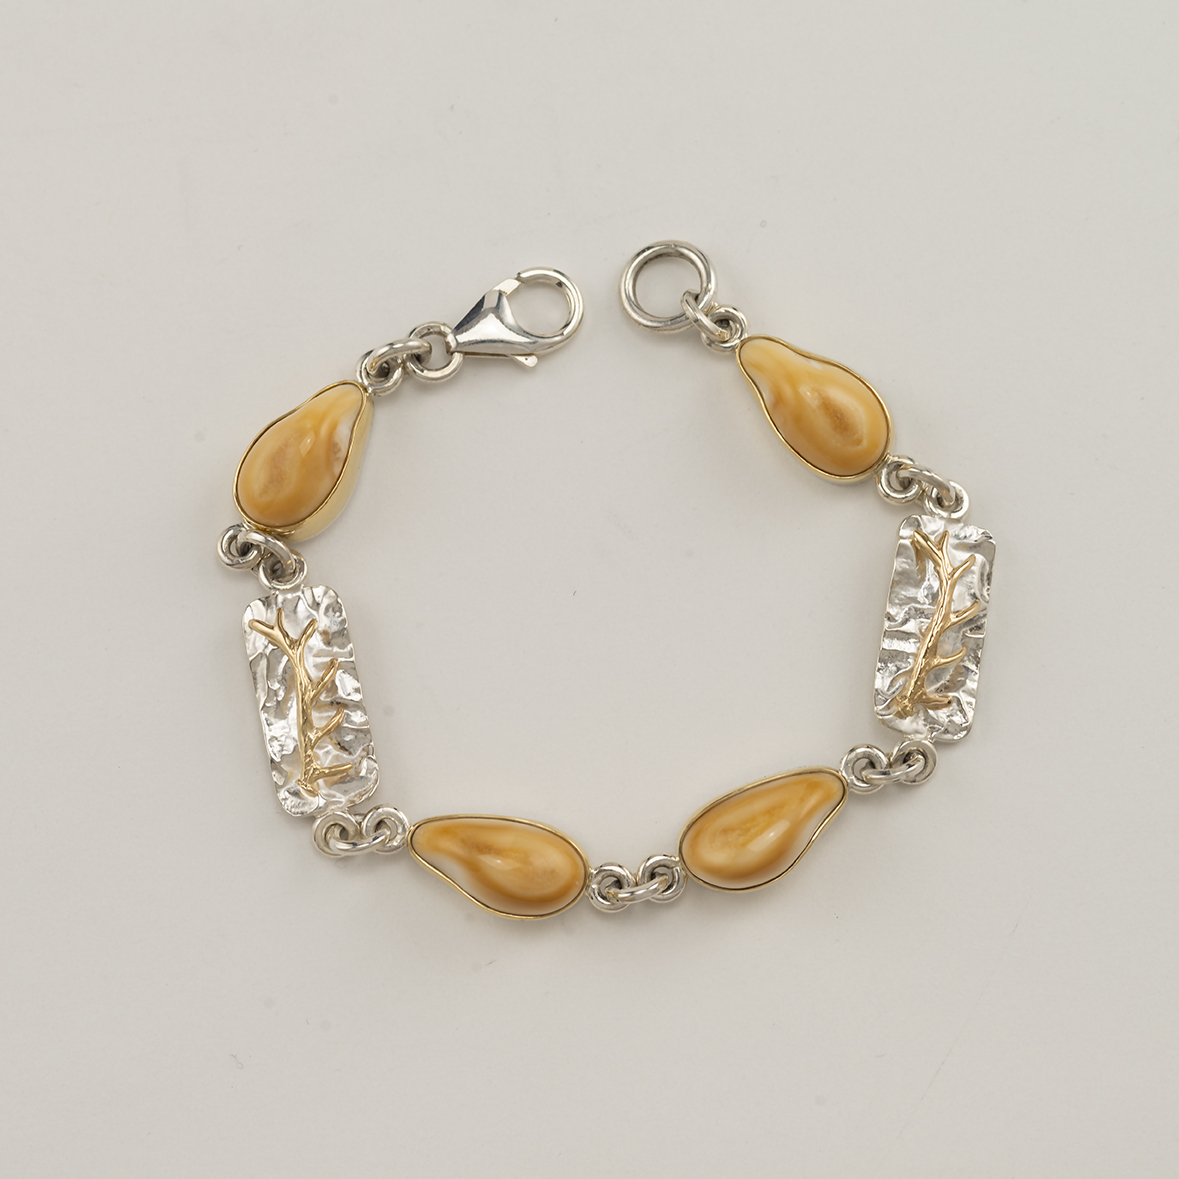 This antler and elk ivory bracelet is one of a kind.